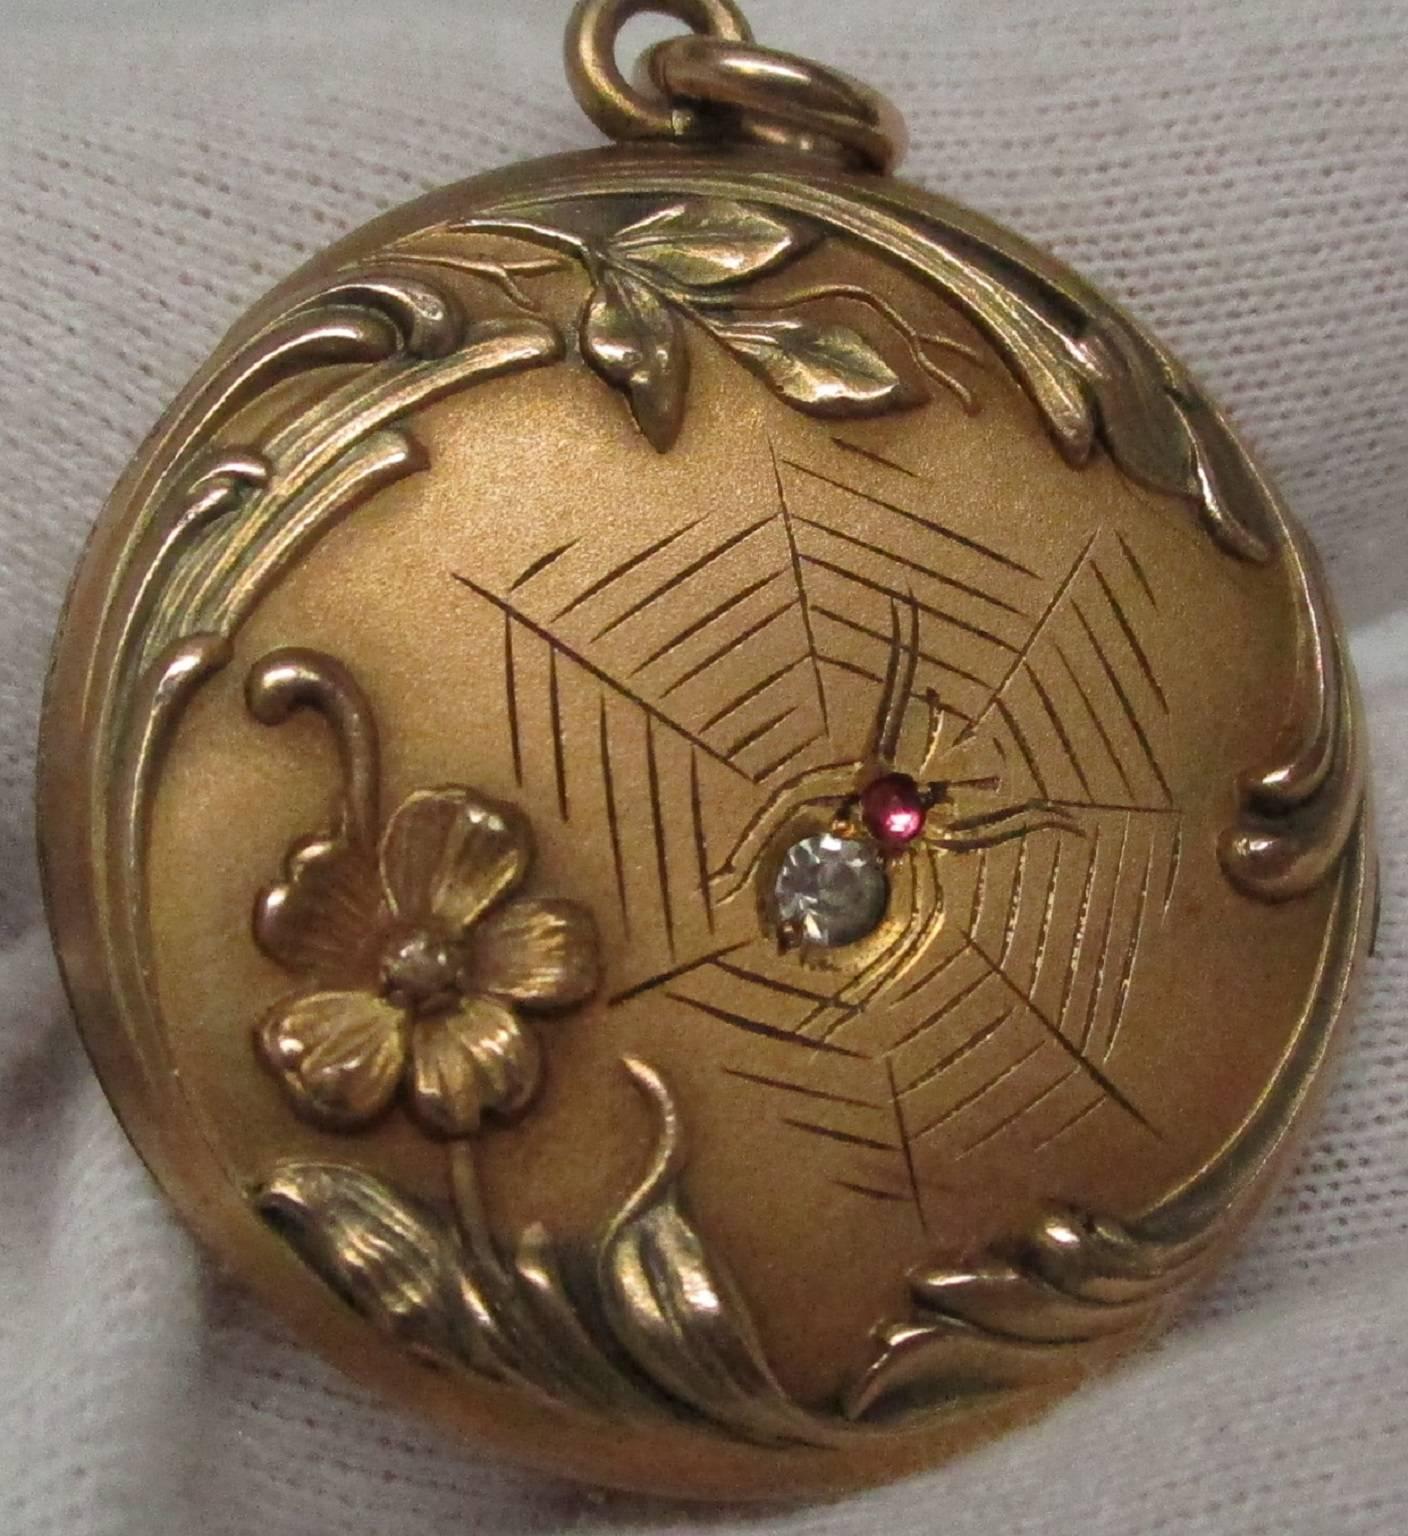 This is a beautiful gold filled Victorian locket with a spider and web motif. The spider is made up of a ruby cabochon for its thorax and a single cut diamond for the rest of its body, resting on an engraved web with a floral edging. Your friends